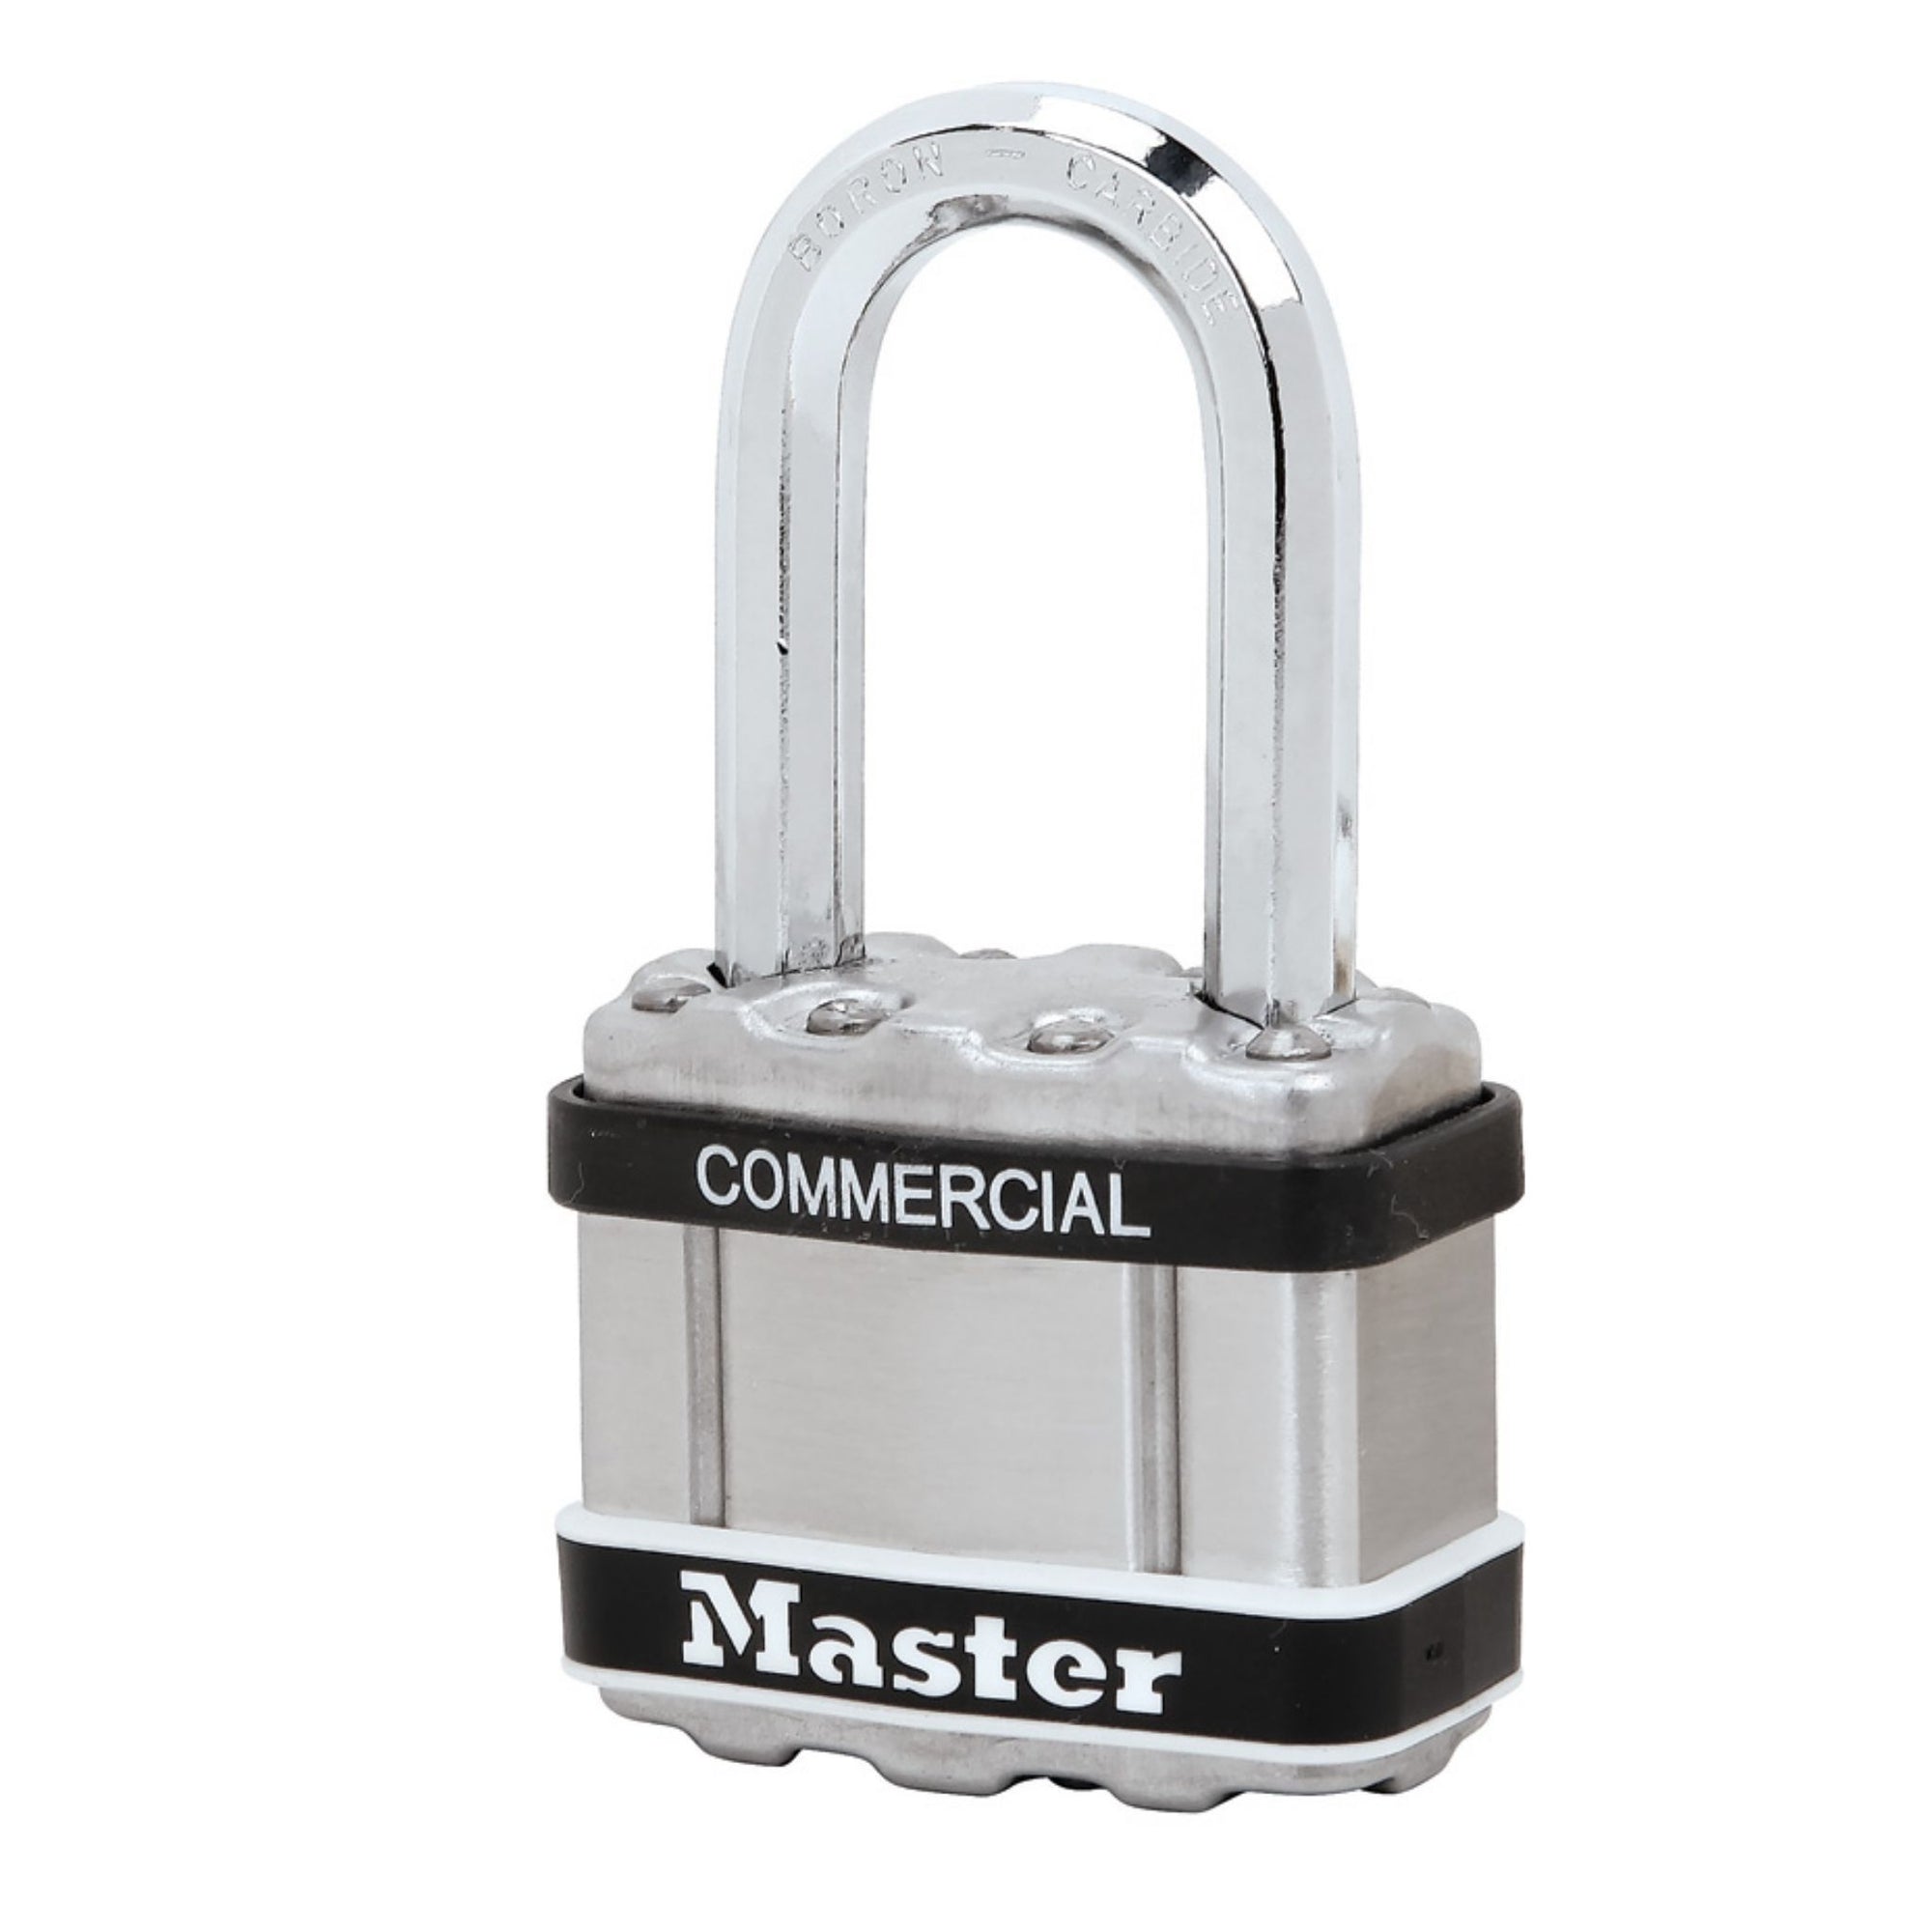 Master Lock M1 STS MKLF Commercial Magnum Padlock Master Keyed Locks with 1-1/2" Shackle - The Lock Source